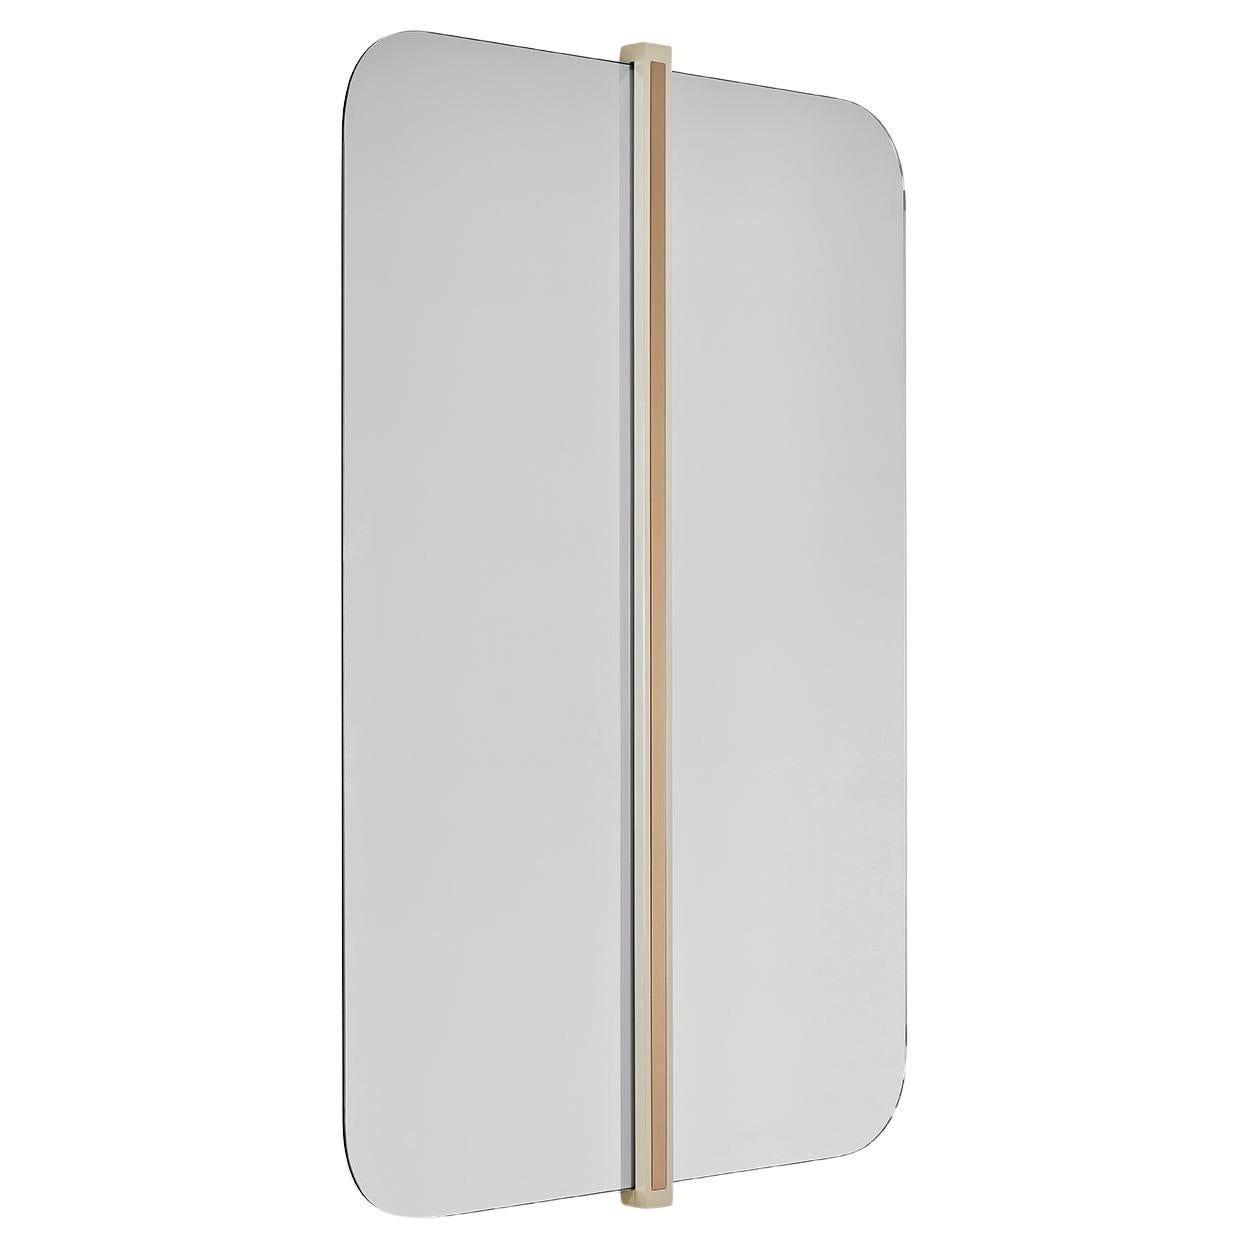 GABRIEL mirror with brass color detail on center and rounded ends For Sale